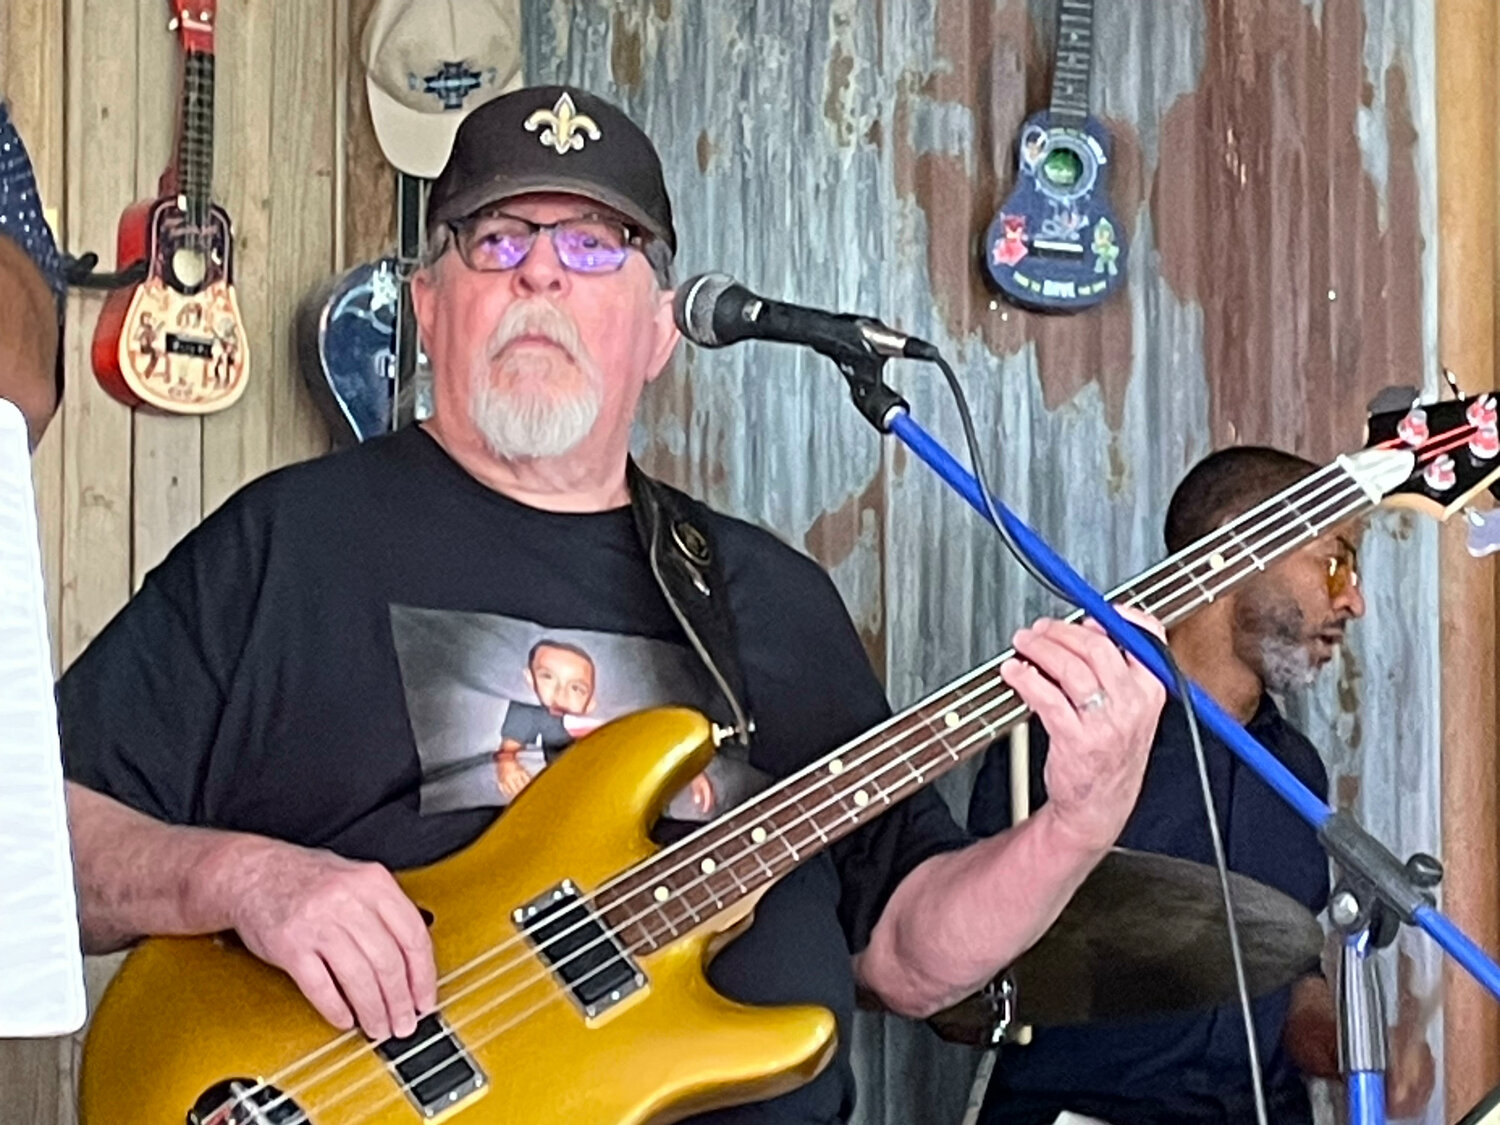 Bass player Steve Whitman is the other half of the Kaktus Kats, the house band at Kaktus Brewing in Bernalillo. (T.S. Last/Sandoval Signpost)